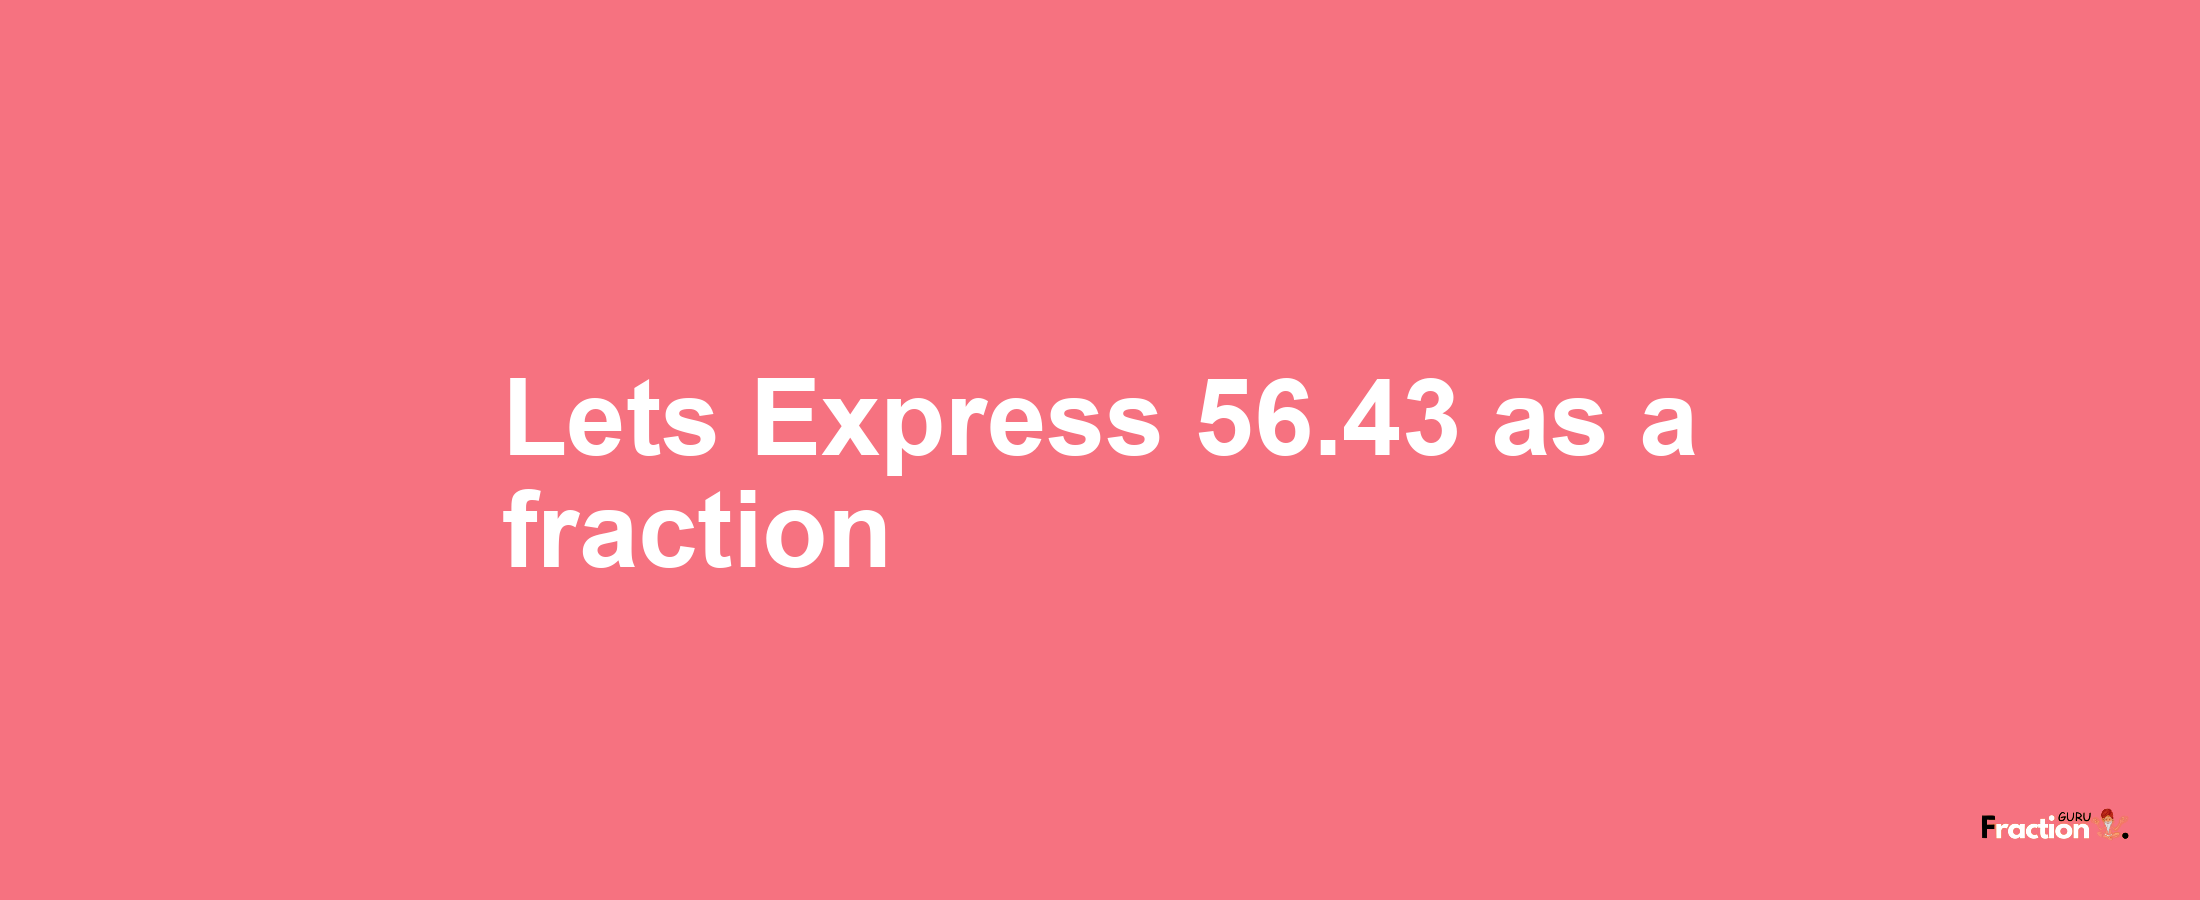 Lets Express 56.43 as afraction